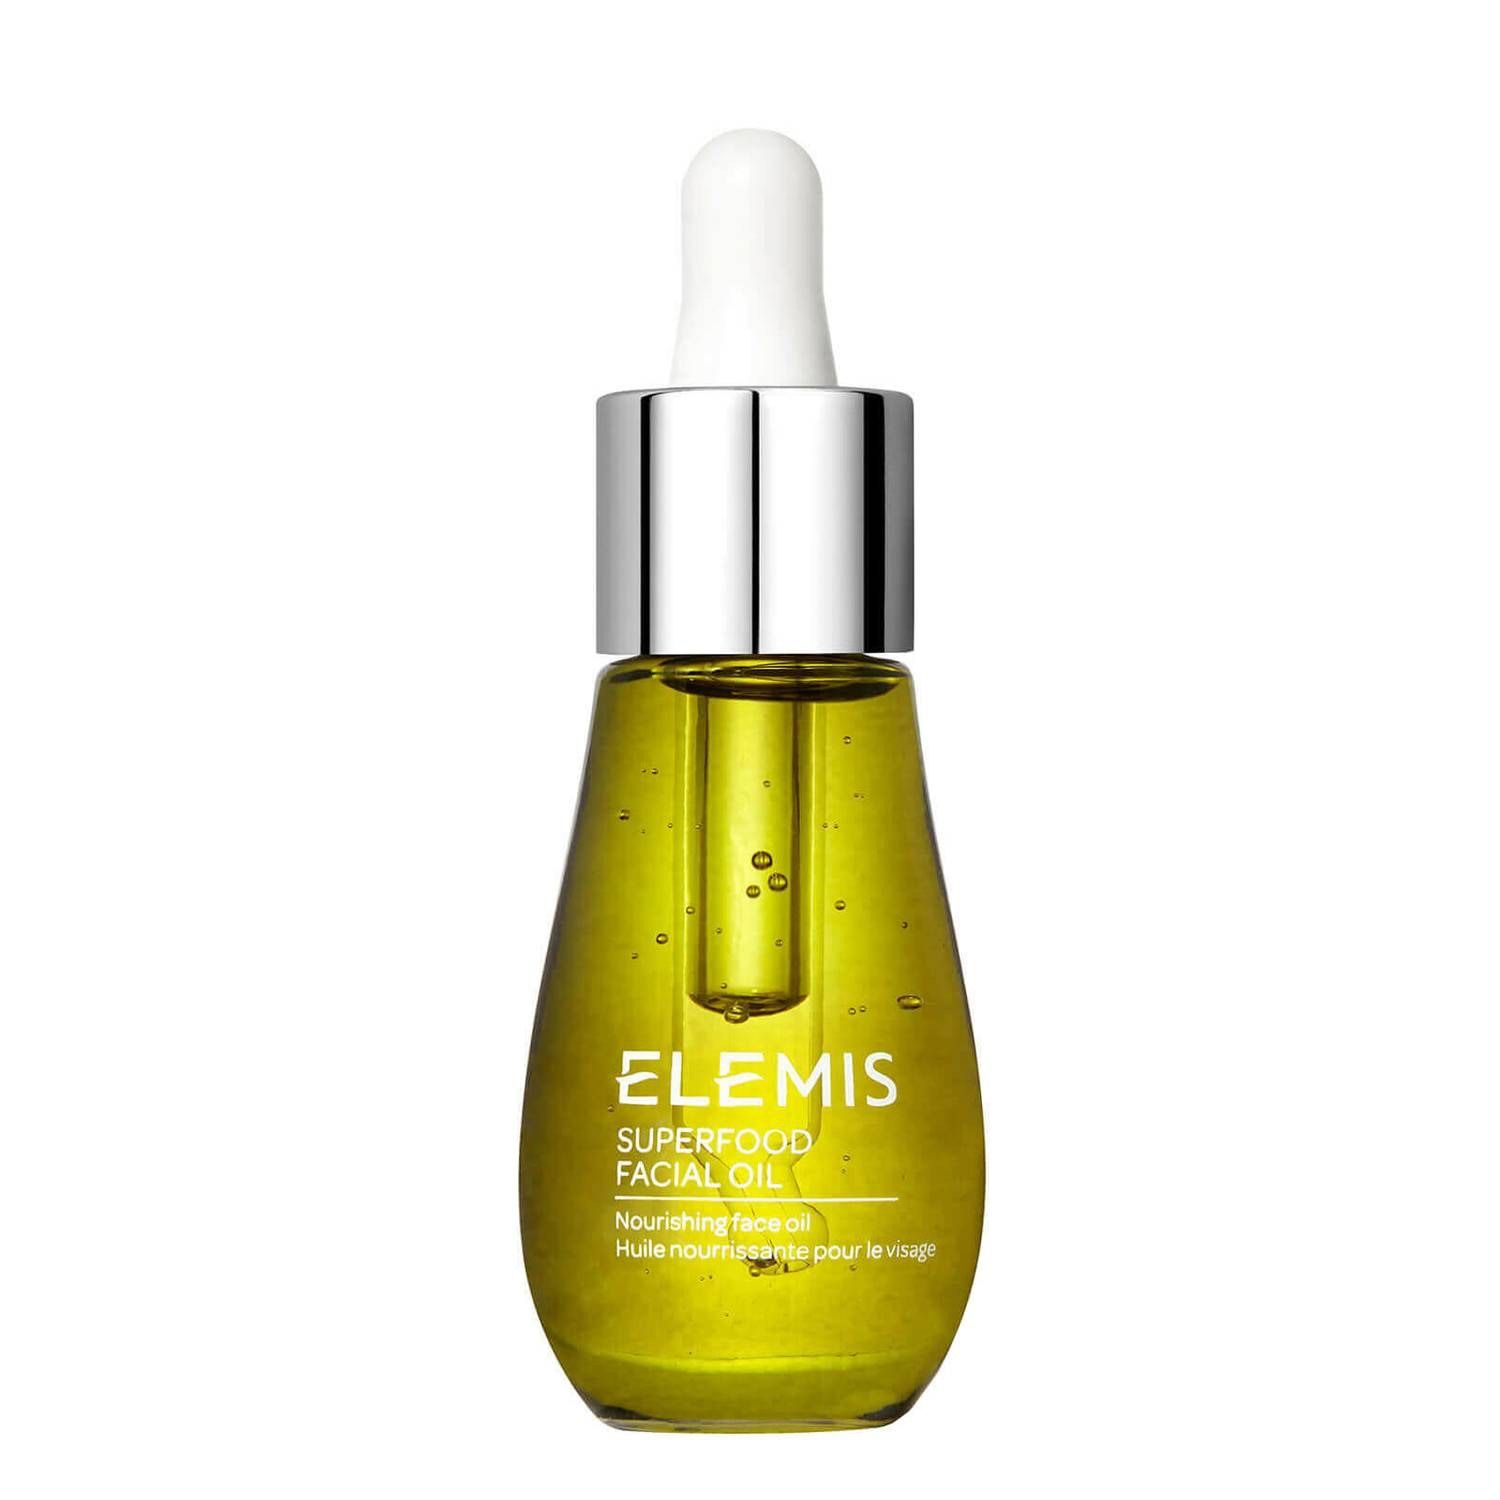 The Elemis Superfood Facial Oil is a nourishing face oil that contains a blend of 9 Superfood Oils including Broccoli, Rosehip, Flaxseed and Daikon Radish. The oil is a light. non-greasy oil that is easily absorbed and leaves skin plump and smooth, whilst also reducing the look of dullness.